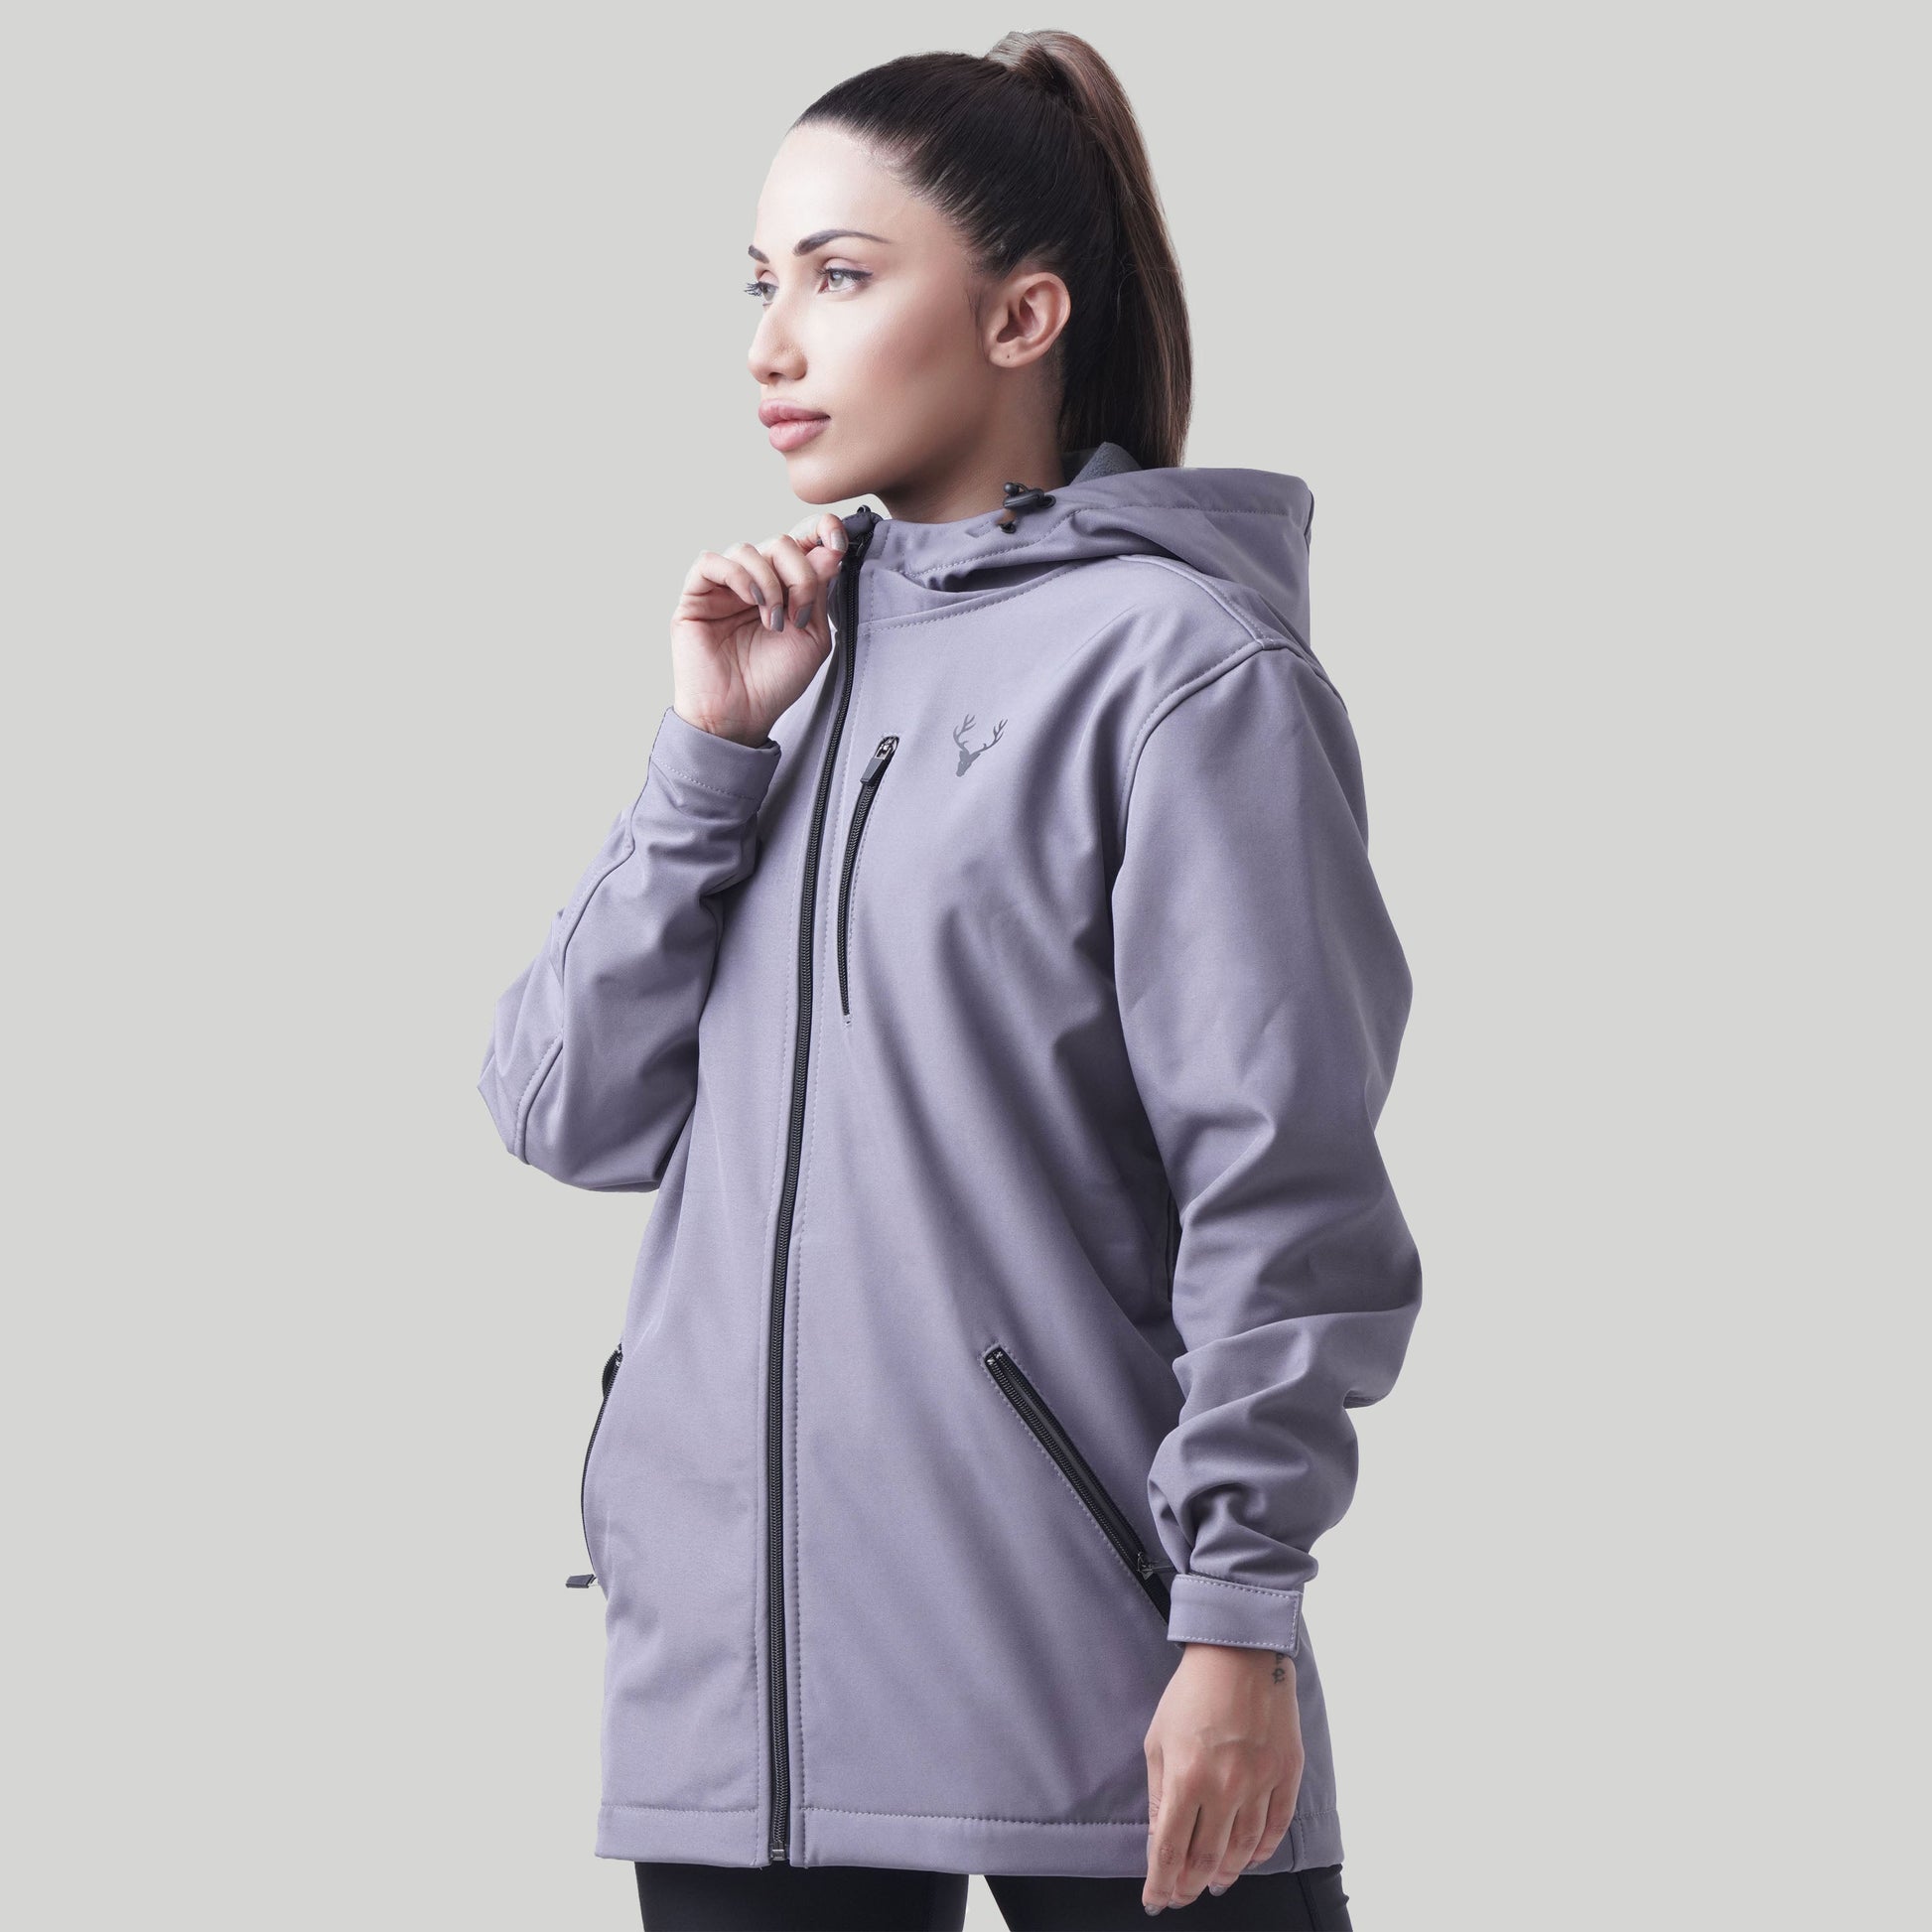 Stag Unisex SoftTech Jacket (Grey) - Stag Clothing